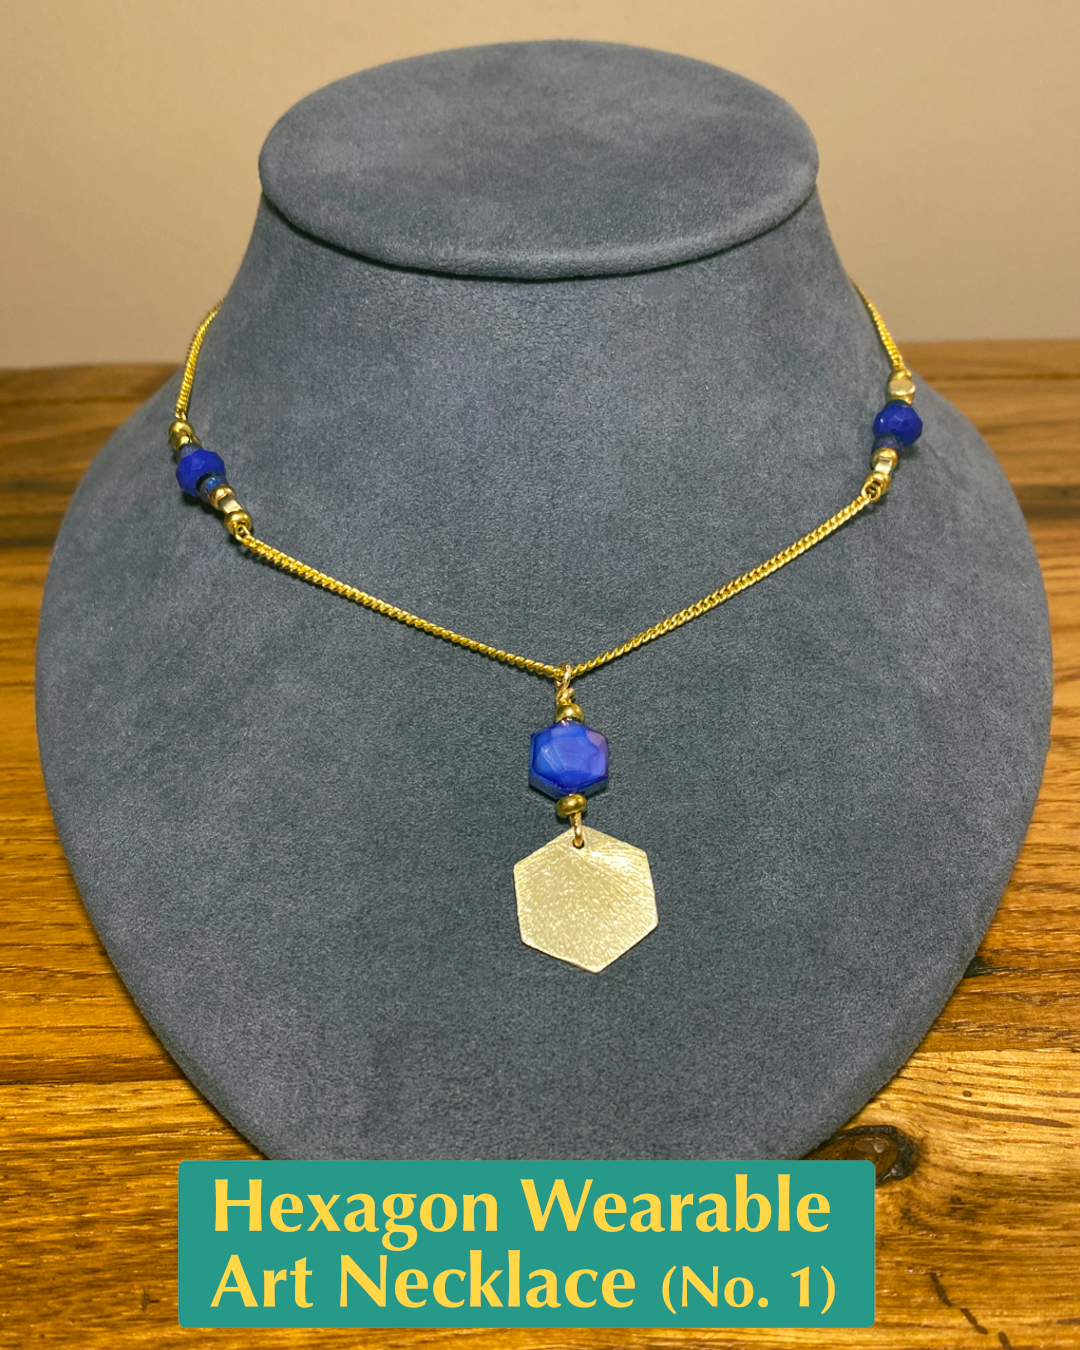 Handmade necklace with blue and gold bead accents and a blue crystal and gold-plated hexagon pendant